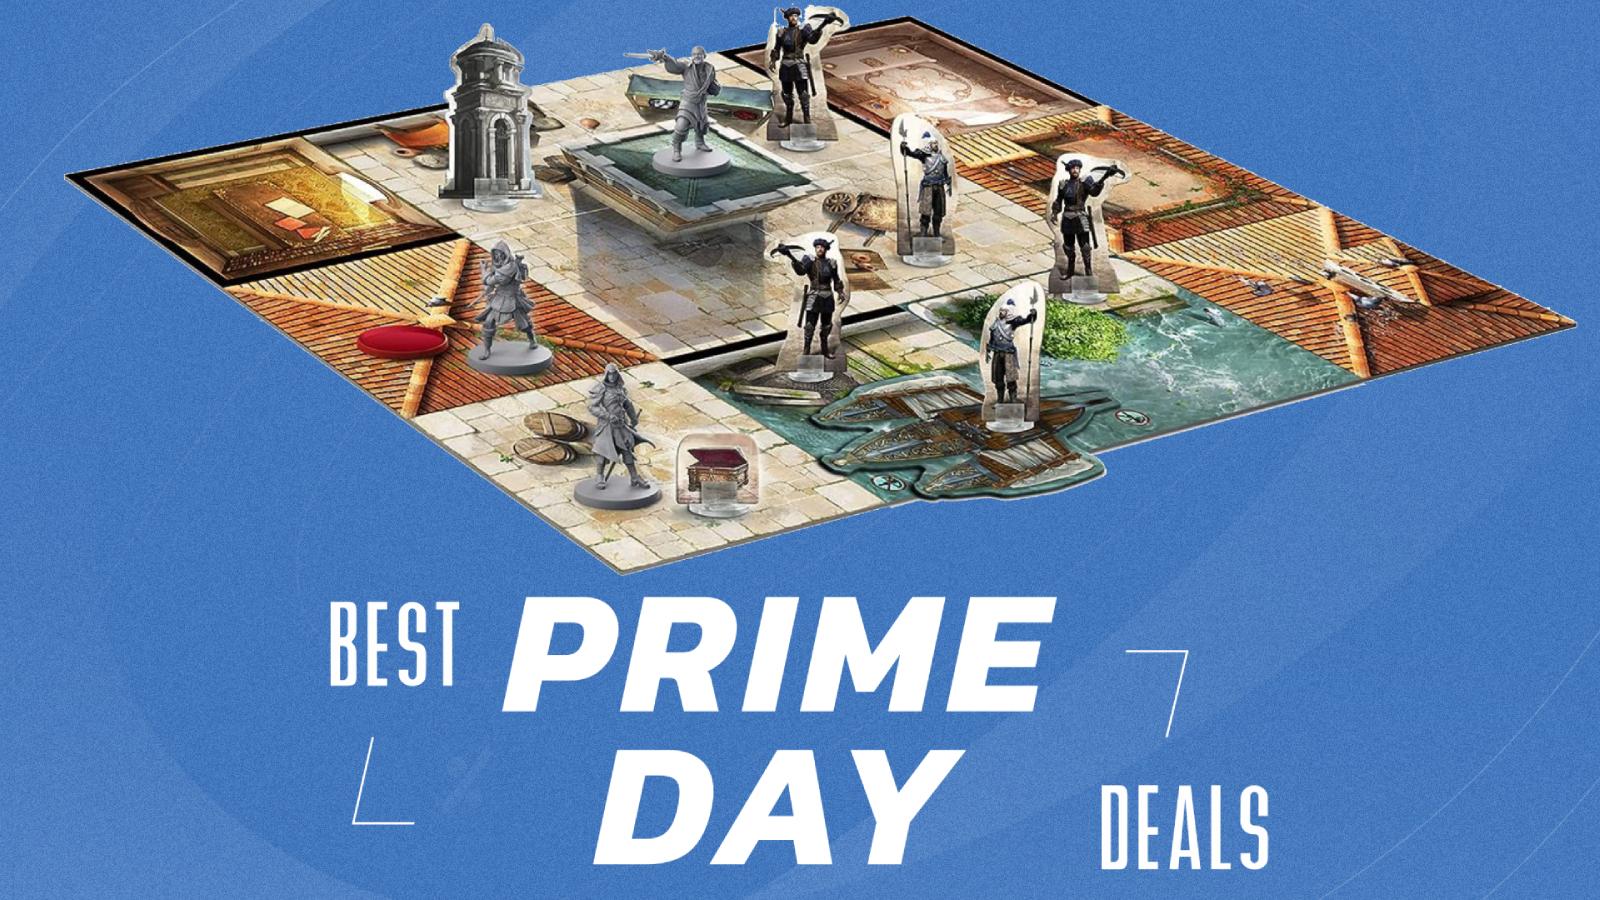 Assassin's creed board game pieces on blue Prime Day background